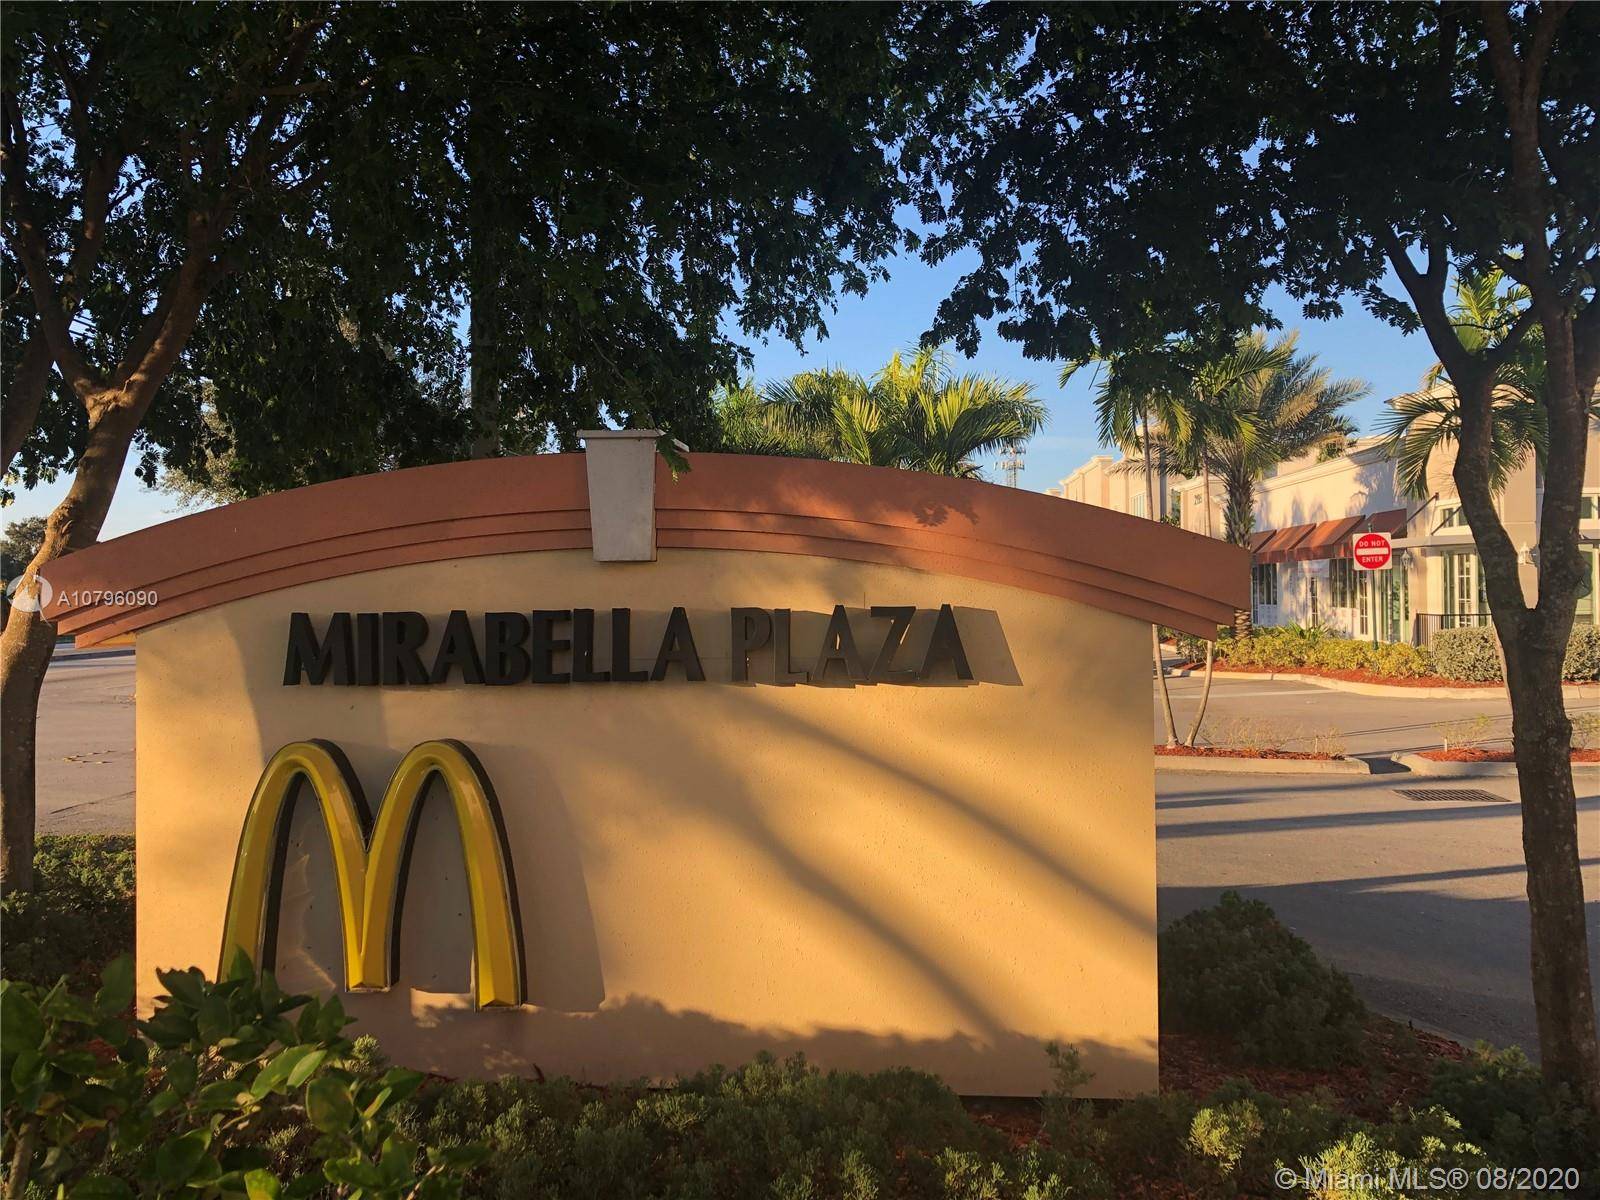 MIRABELLA PLAZA SHOPPING CENTER, NEW 2017, BEST UNIT LOCATION ON 1st FLOOR JUST IN FRONT OF A HEAVY TRANSITED MAIN STREET TO RECEIVE GREAT EXPOSURE, 648 sq ft WITH PRIVATE ...